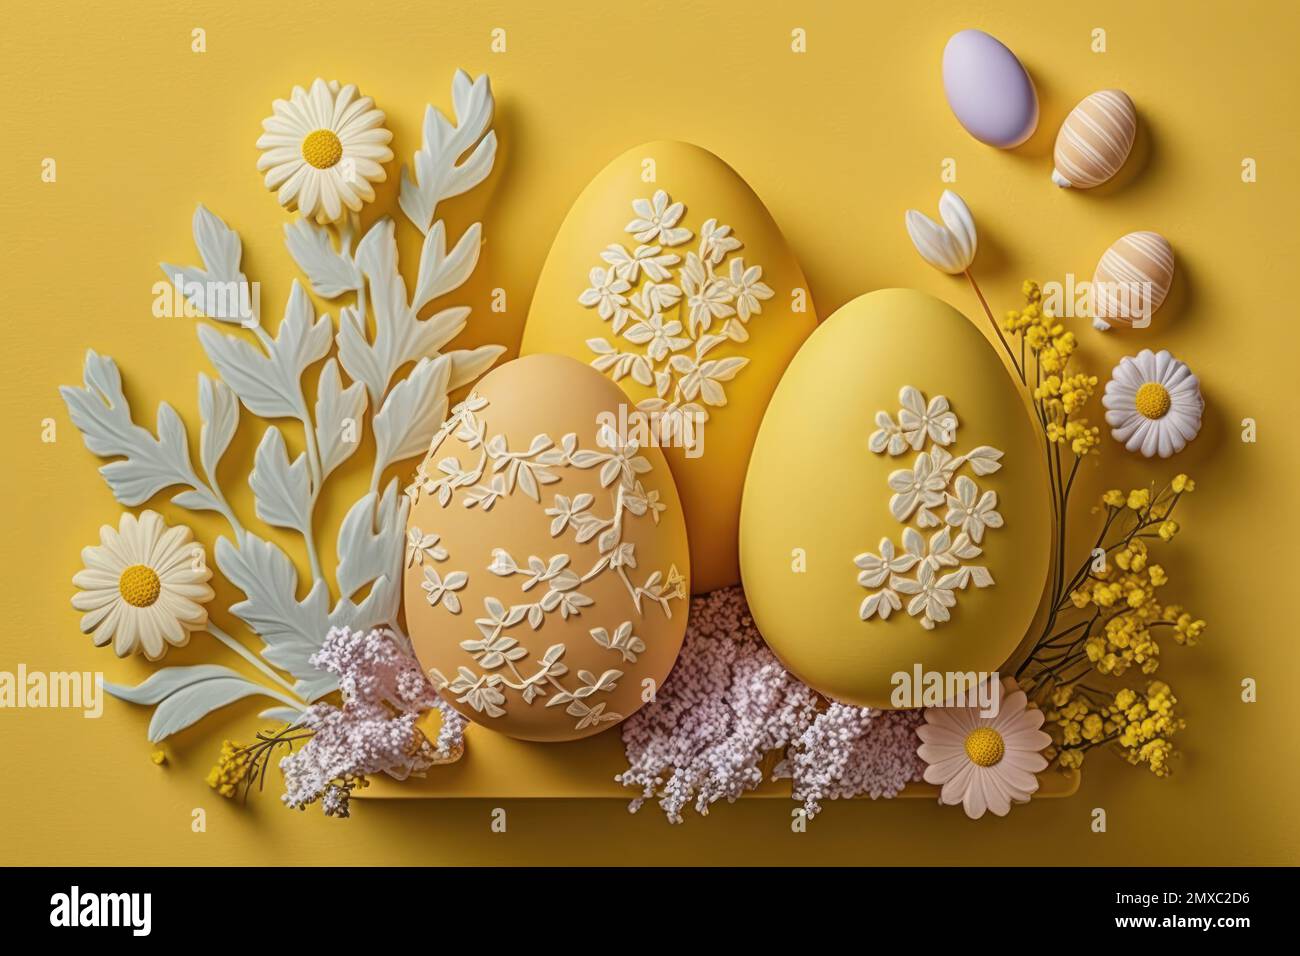 This sleek and modern Easter background is all about simplicity and sophistication. Against a clean white background, a minimal arrangement of fresh b Stock Photo